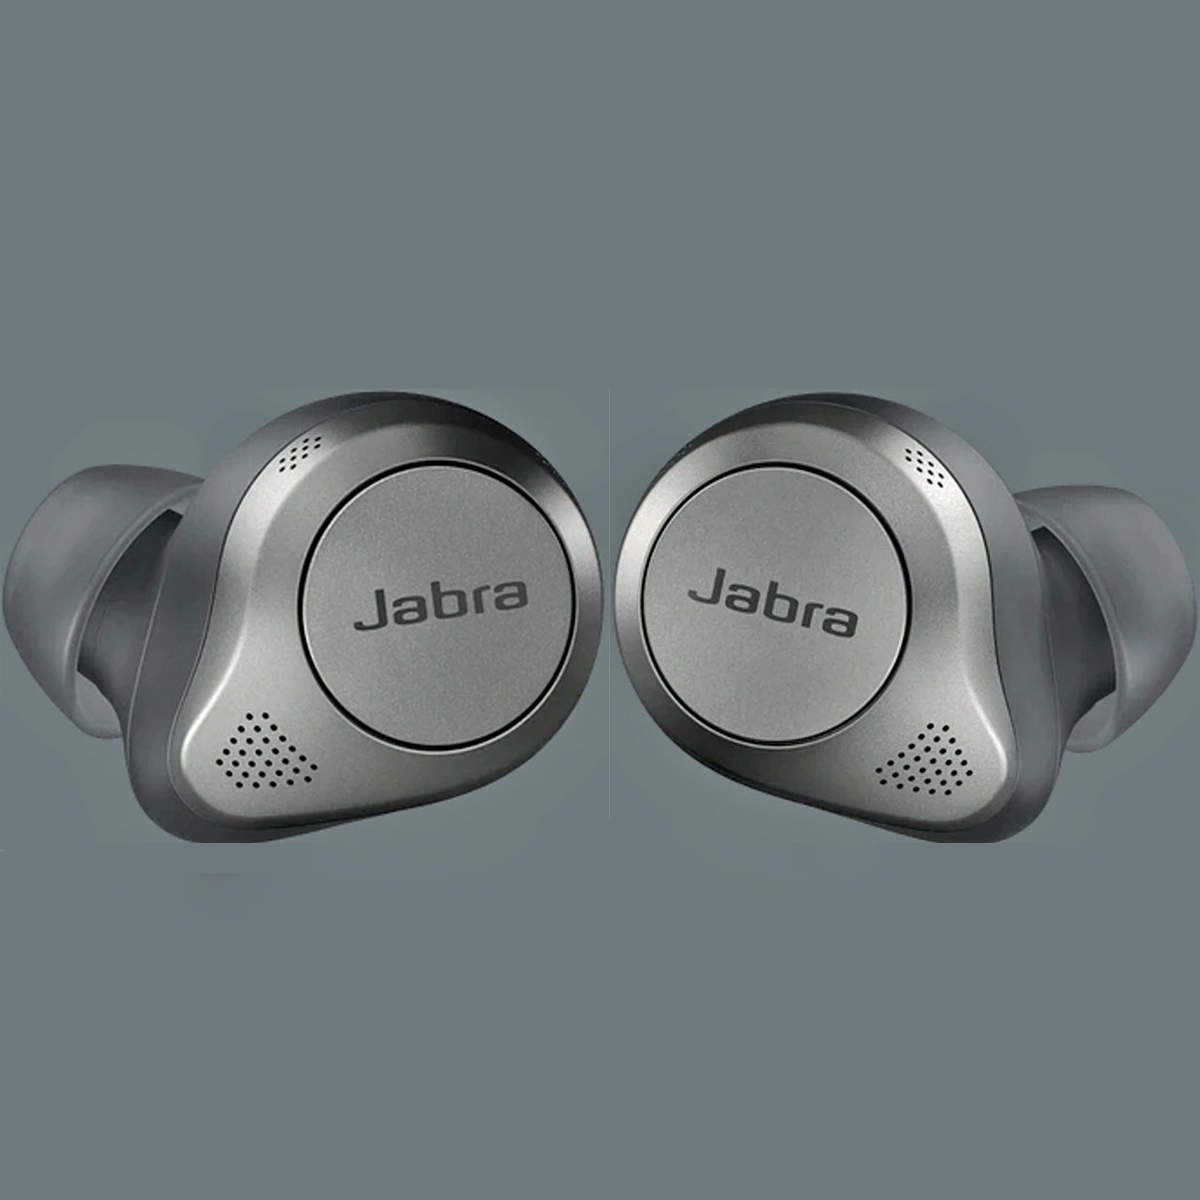 Jabra Elite 85t review: Subtle changes in design and functionality 